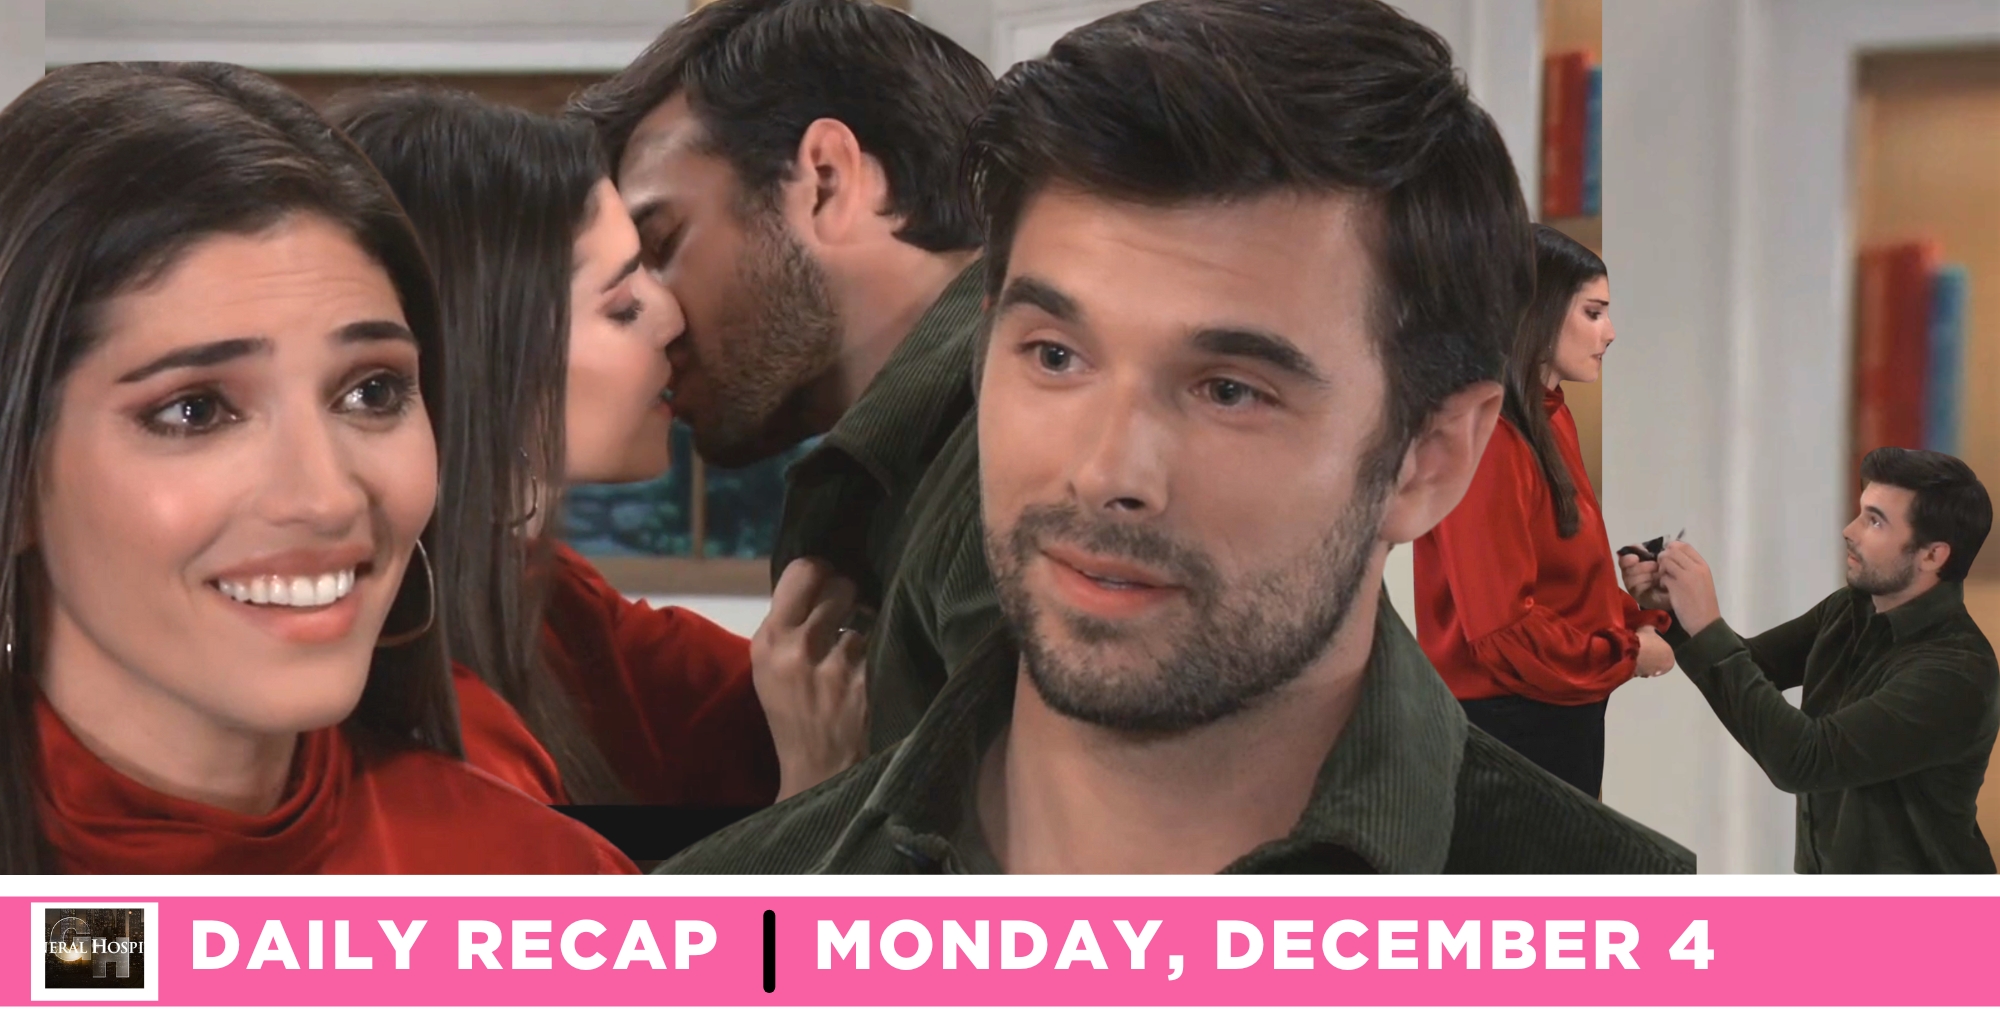 brook lynn quartermine said yes to harrison chase on general hospital recap for monday, december 4, 2023, episode 15355.